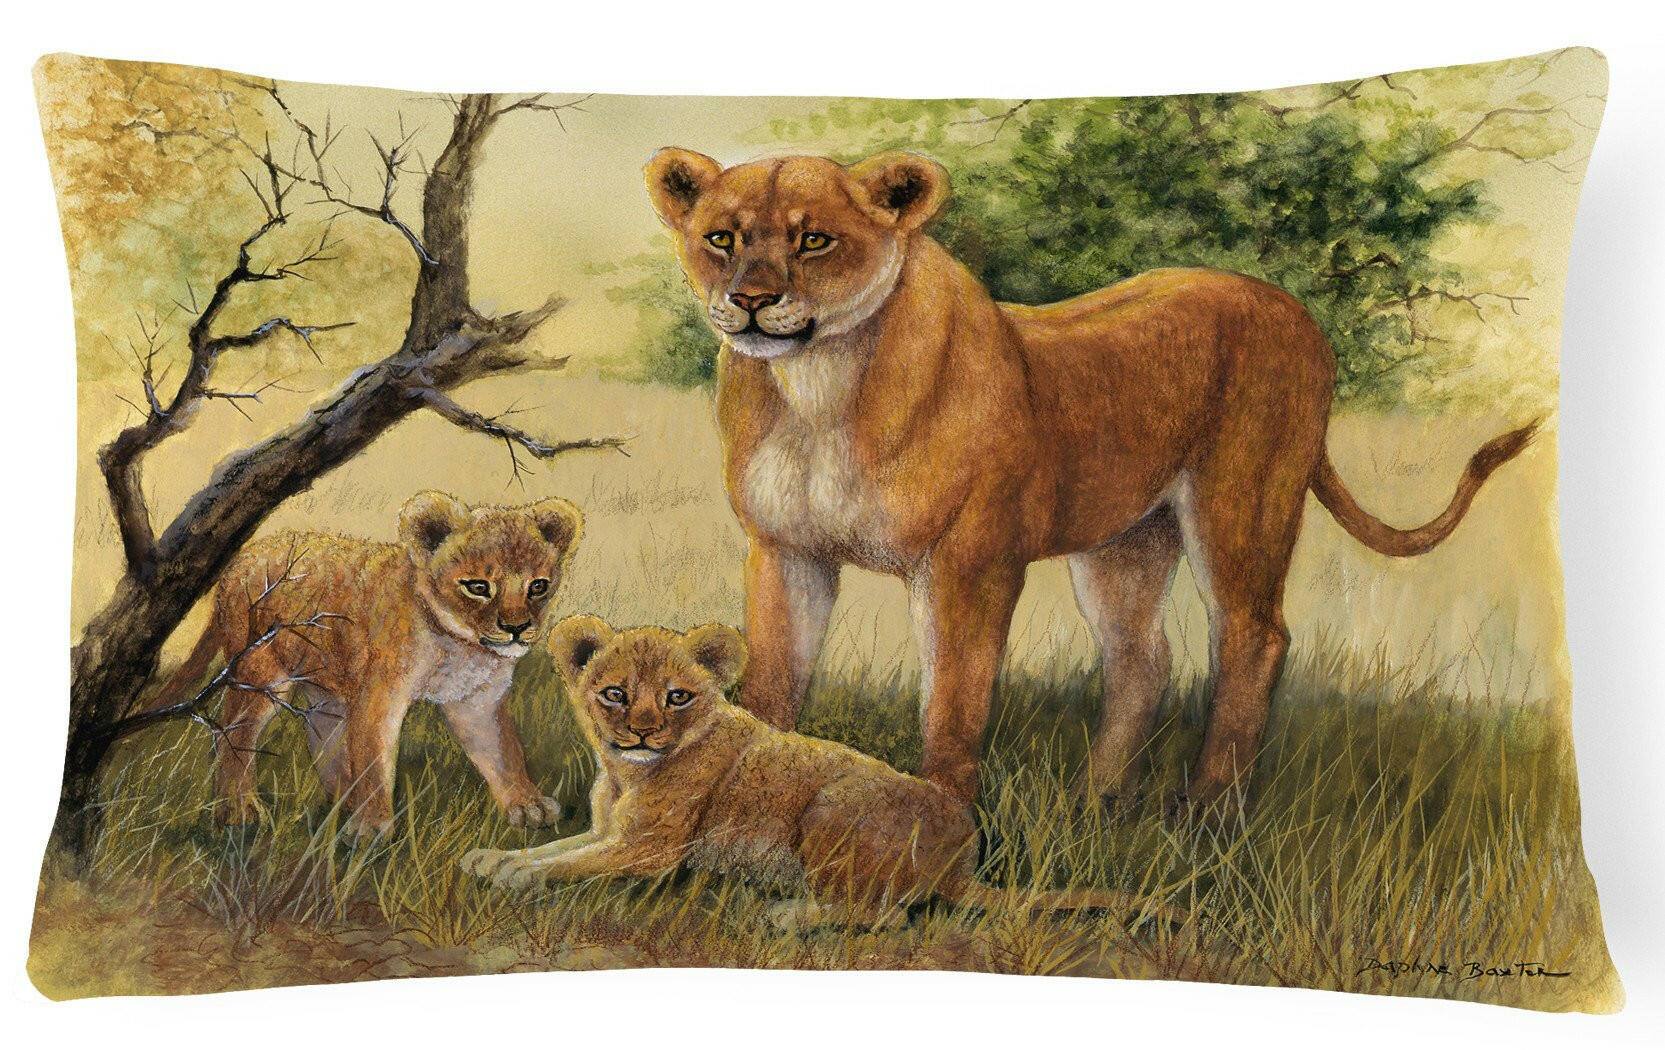 Lion and Cubs by Daphne Baxter Fabric Decorative Pillow BDBA0307PW1216 by Caroline's Treasures